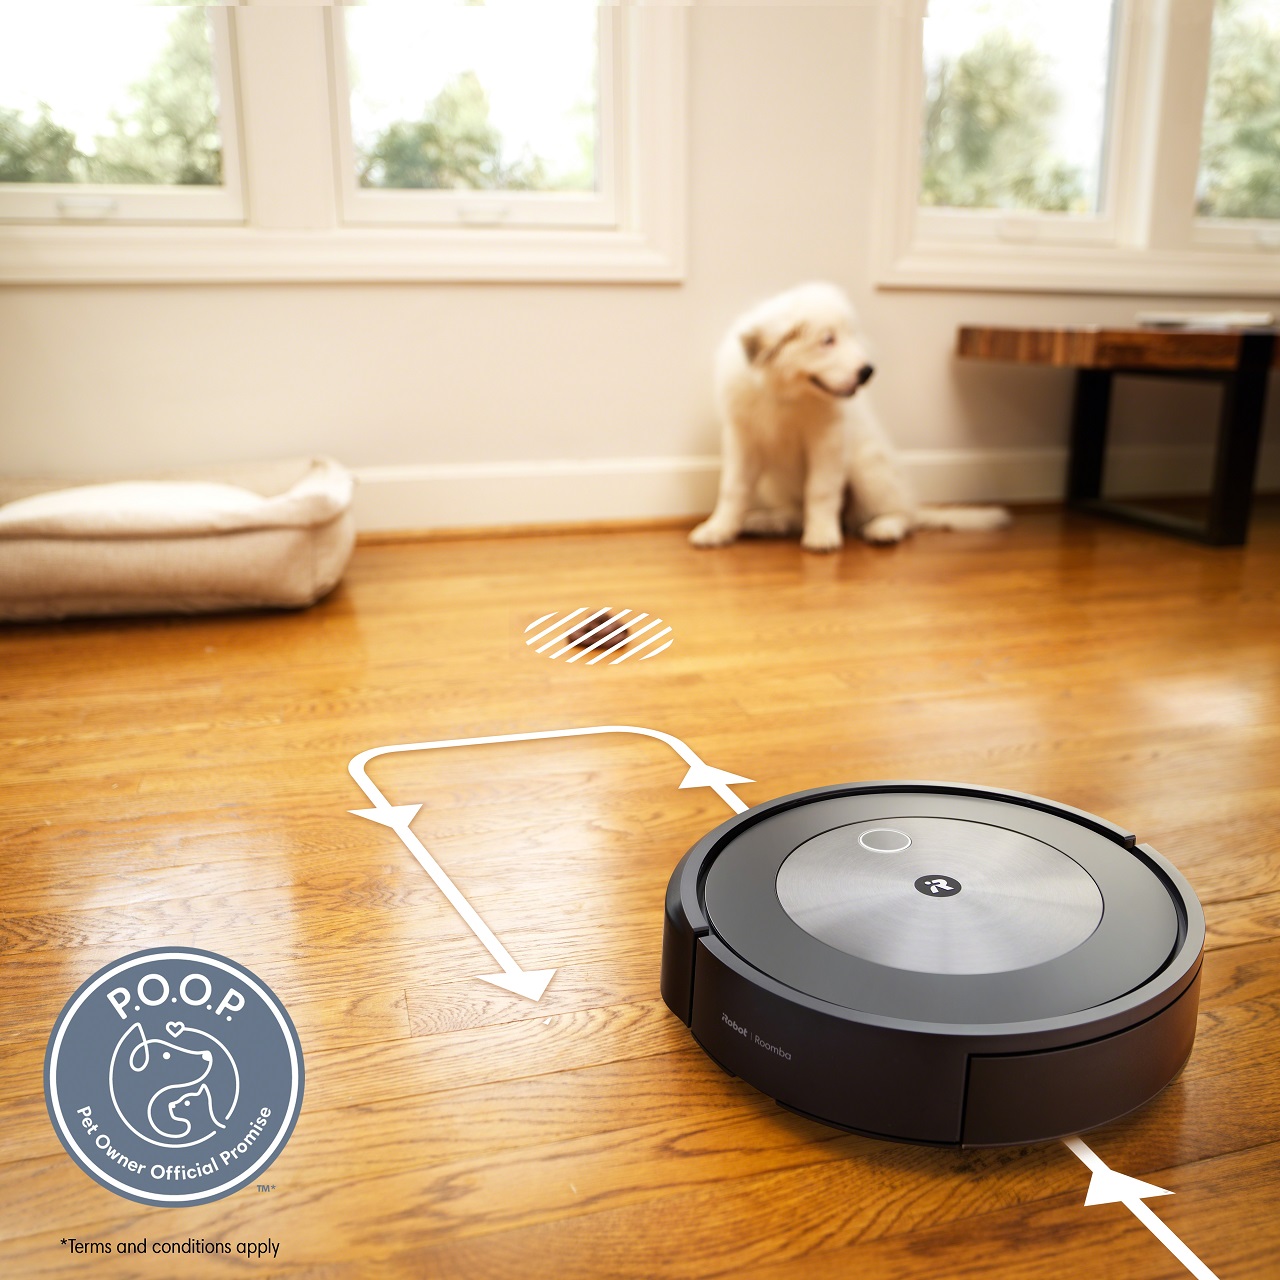 iRobot® Roomba® j7+ (7550) Self-Emptying Robot Vacuum – Identifies and avoids obstacles like pet waste & cords, Empties itself for 60 days, Smart Mapping, Works with Google, Ideal for Pet Hair - image 3 of 13